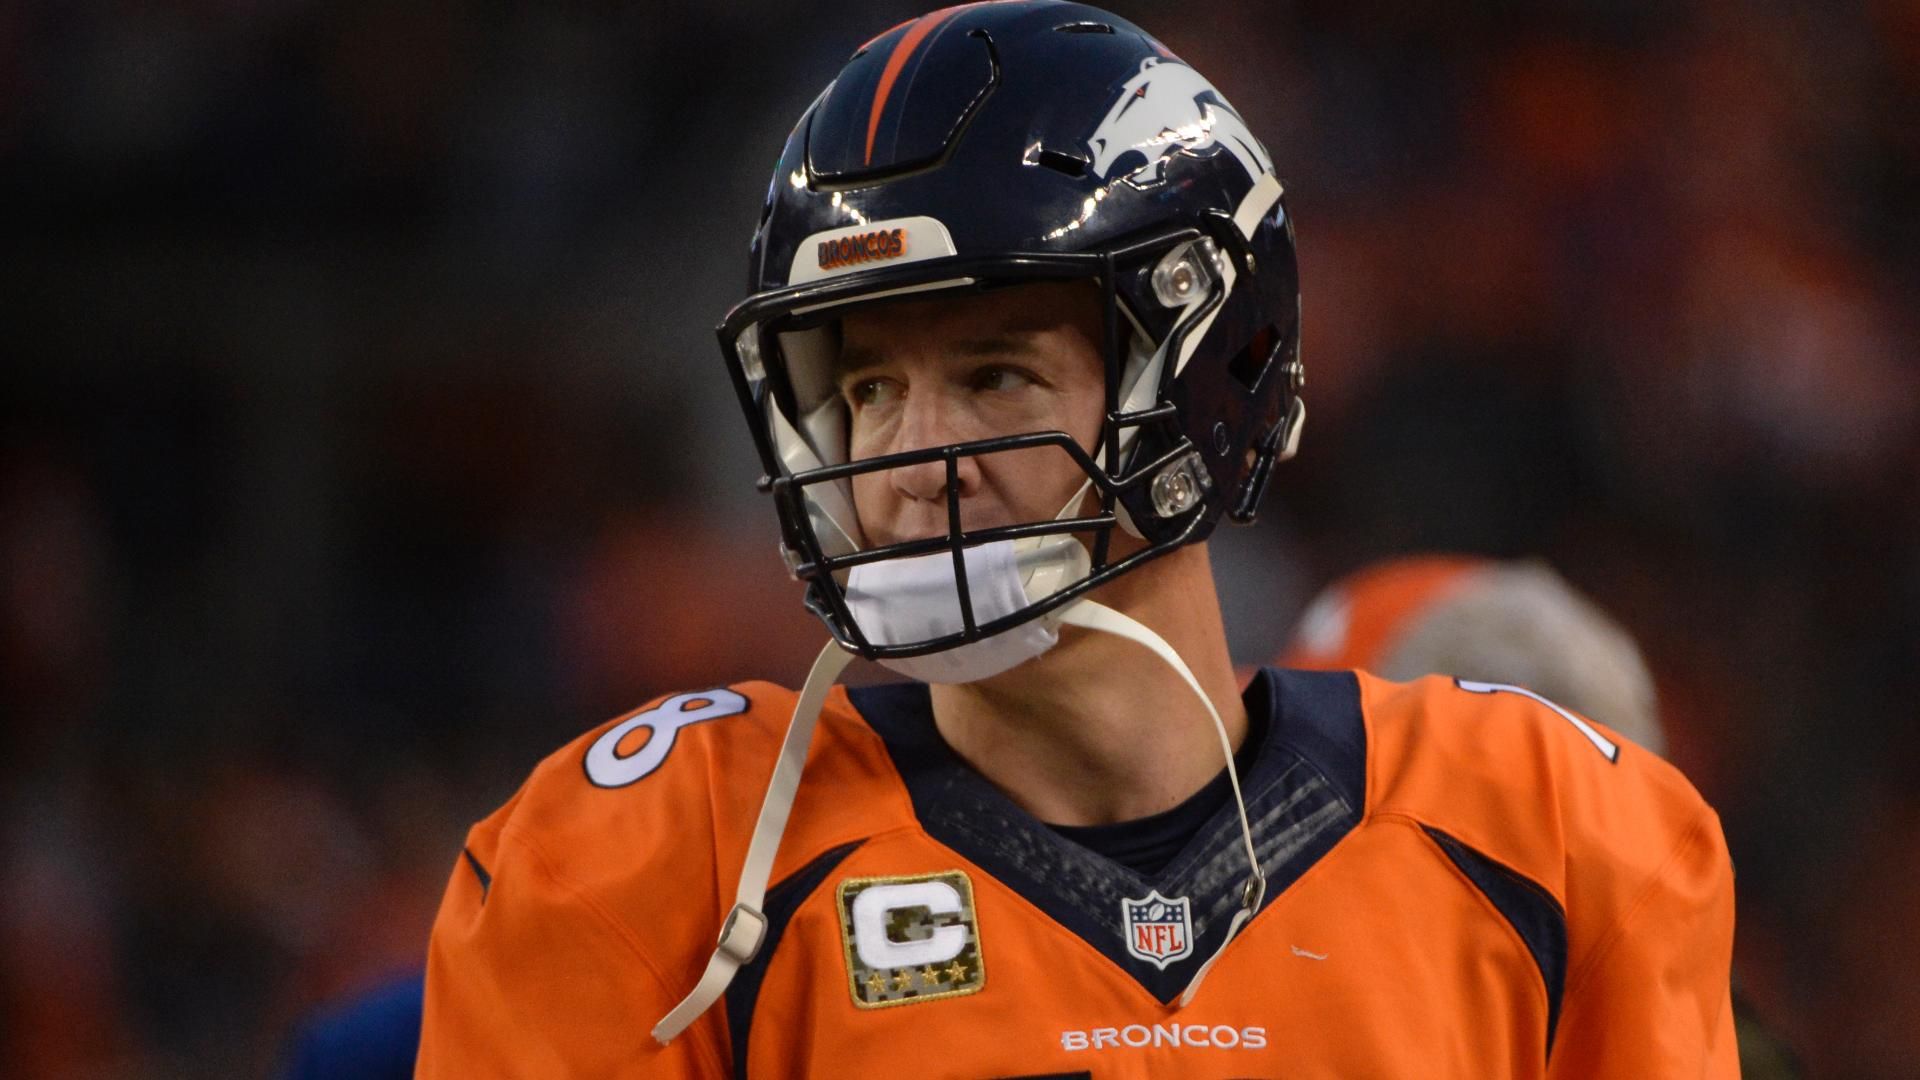 Source for Manning HGH allegations recants story